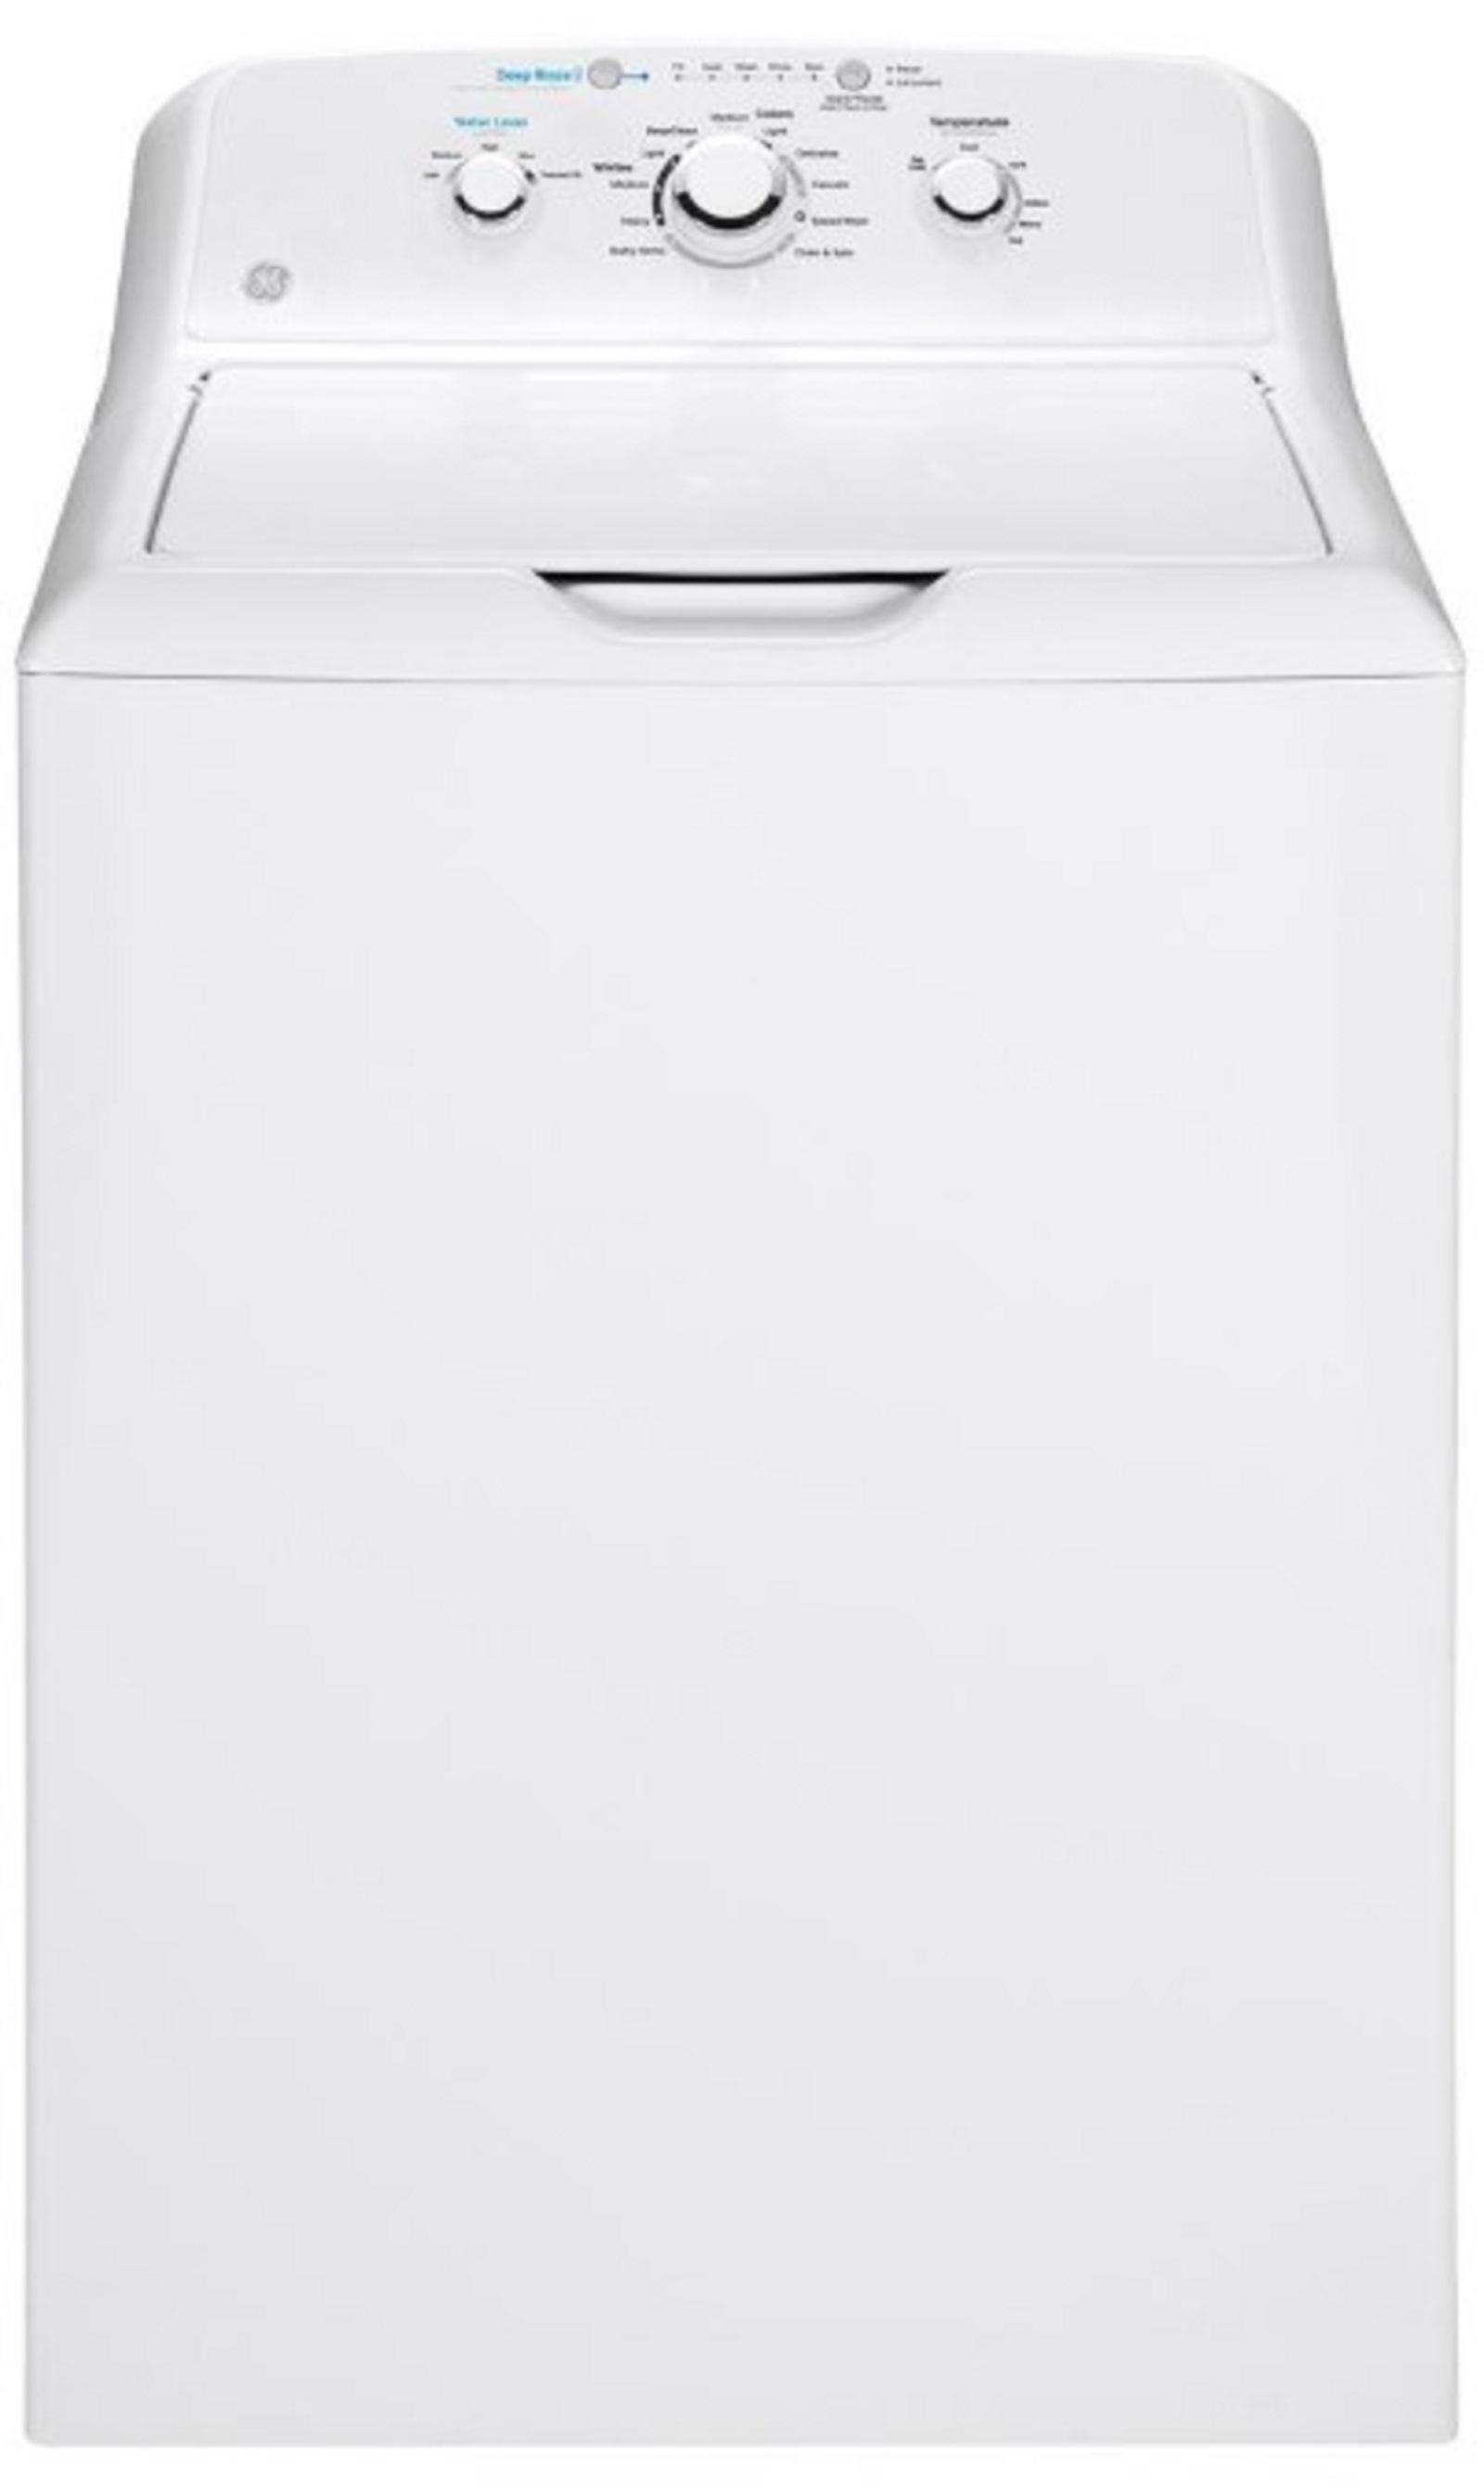 GE GTW220ACKWW 3.8 cu.ft. White Top Load Washer